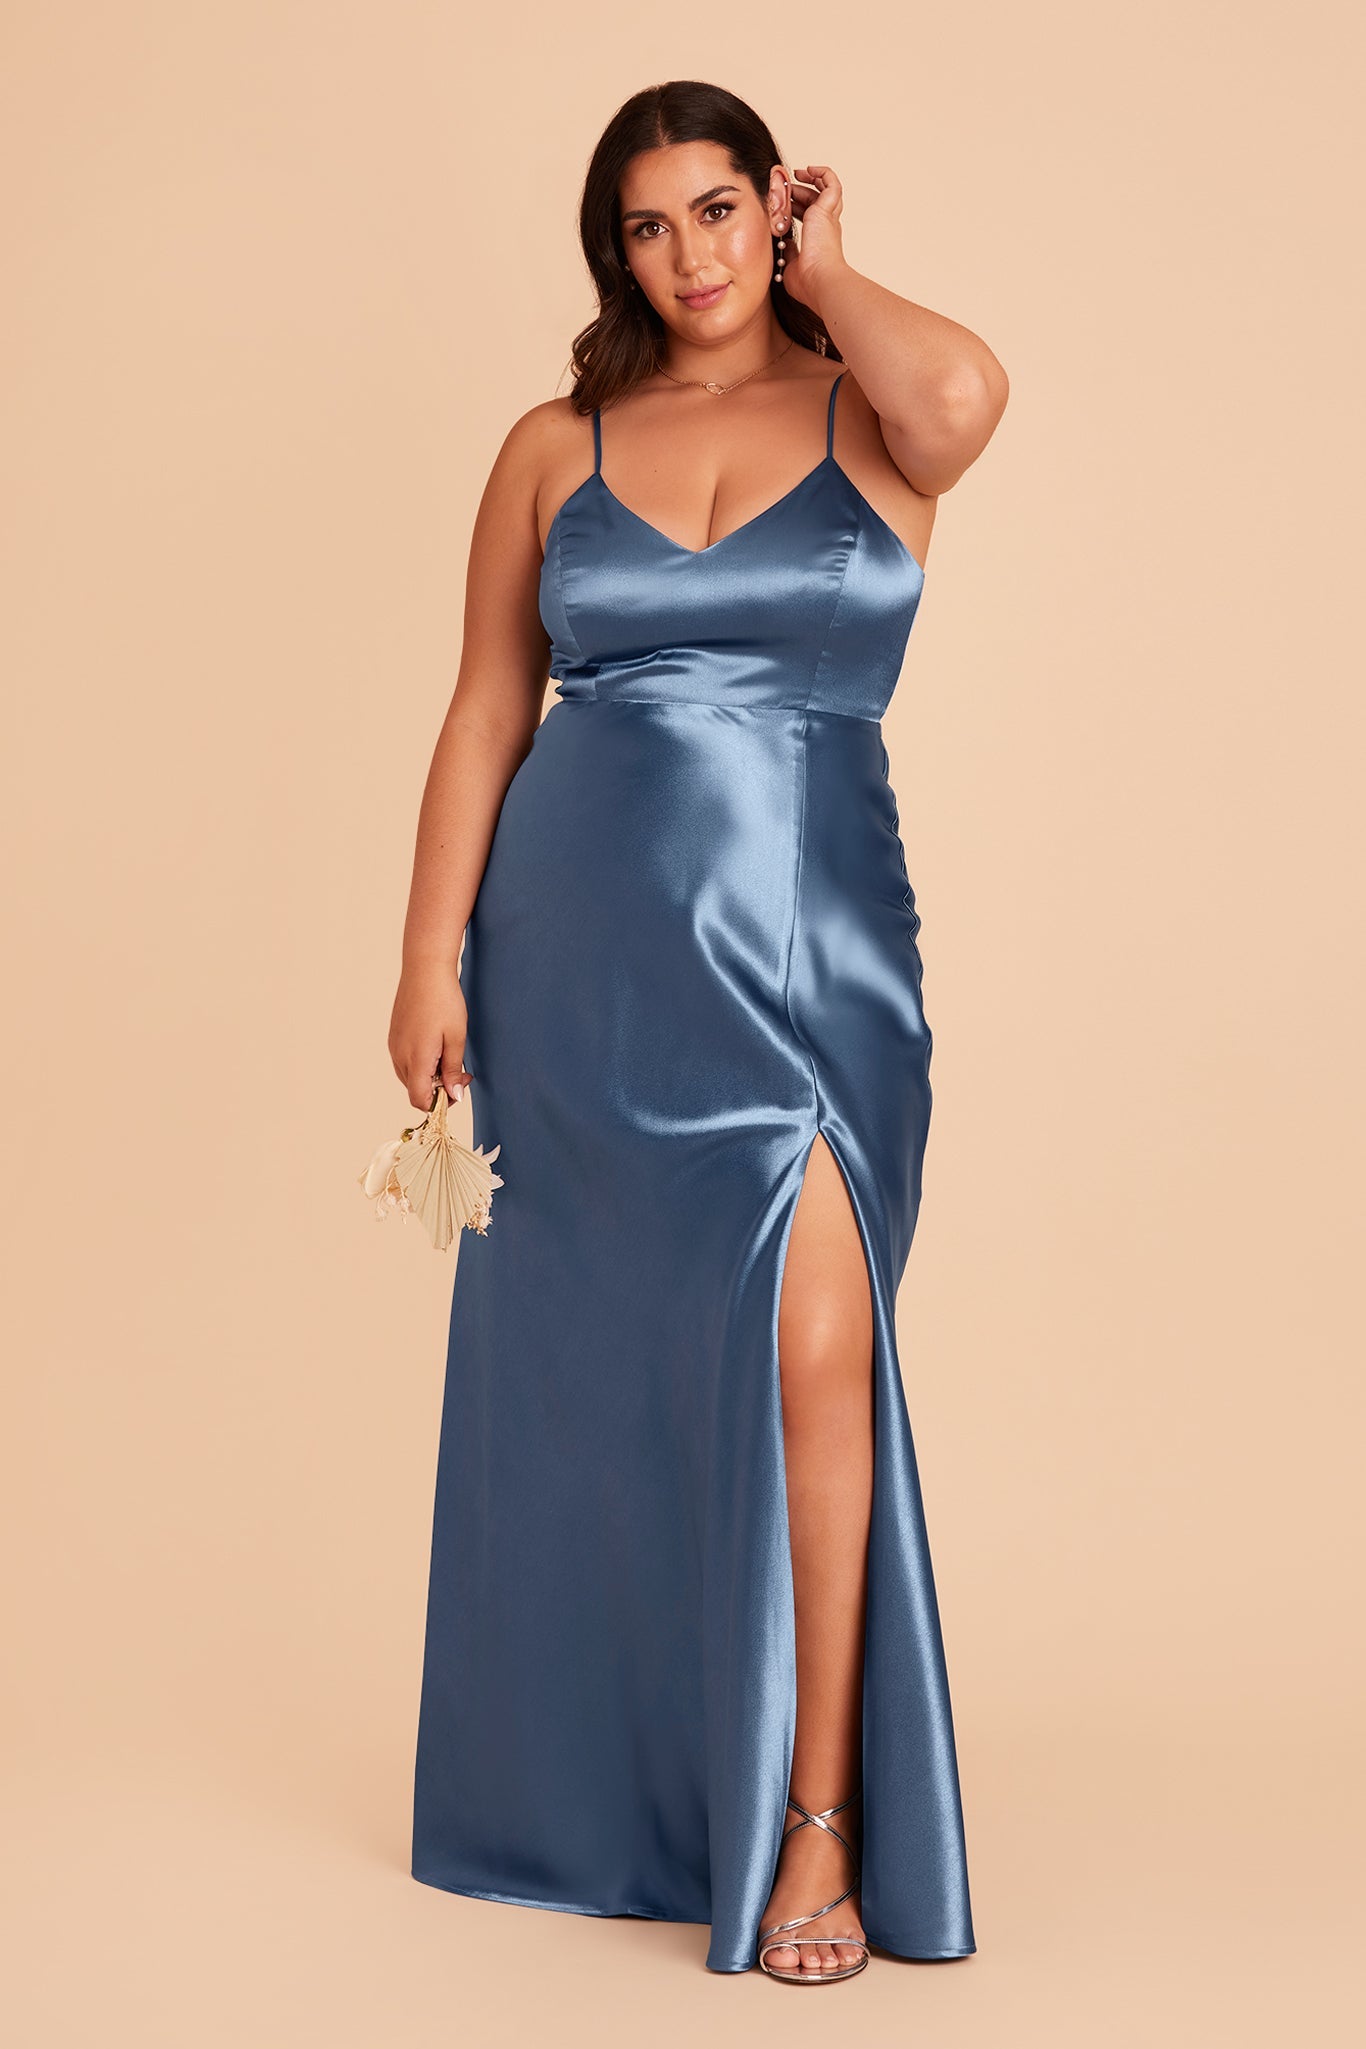 Jay plus size bridesmaid dress with slit in twilight satin by Birdy Grey, front view